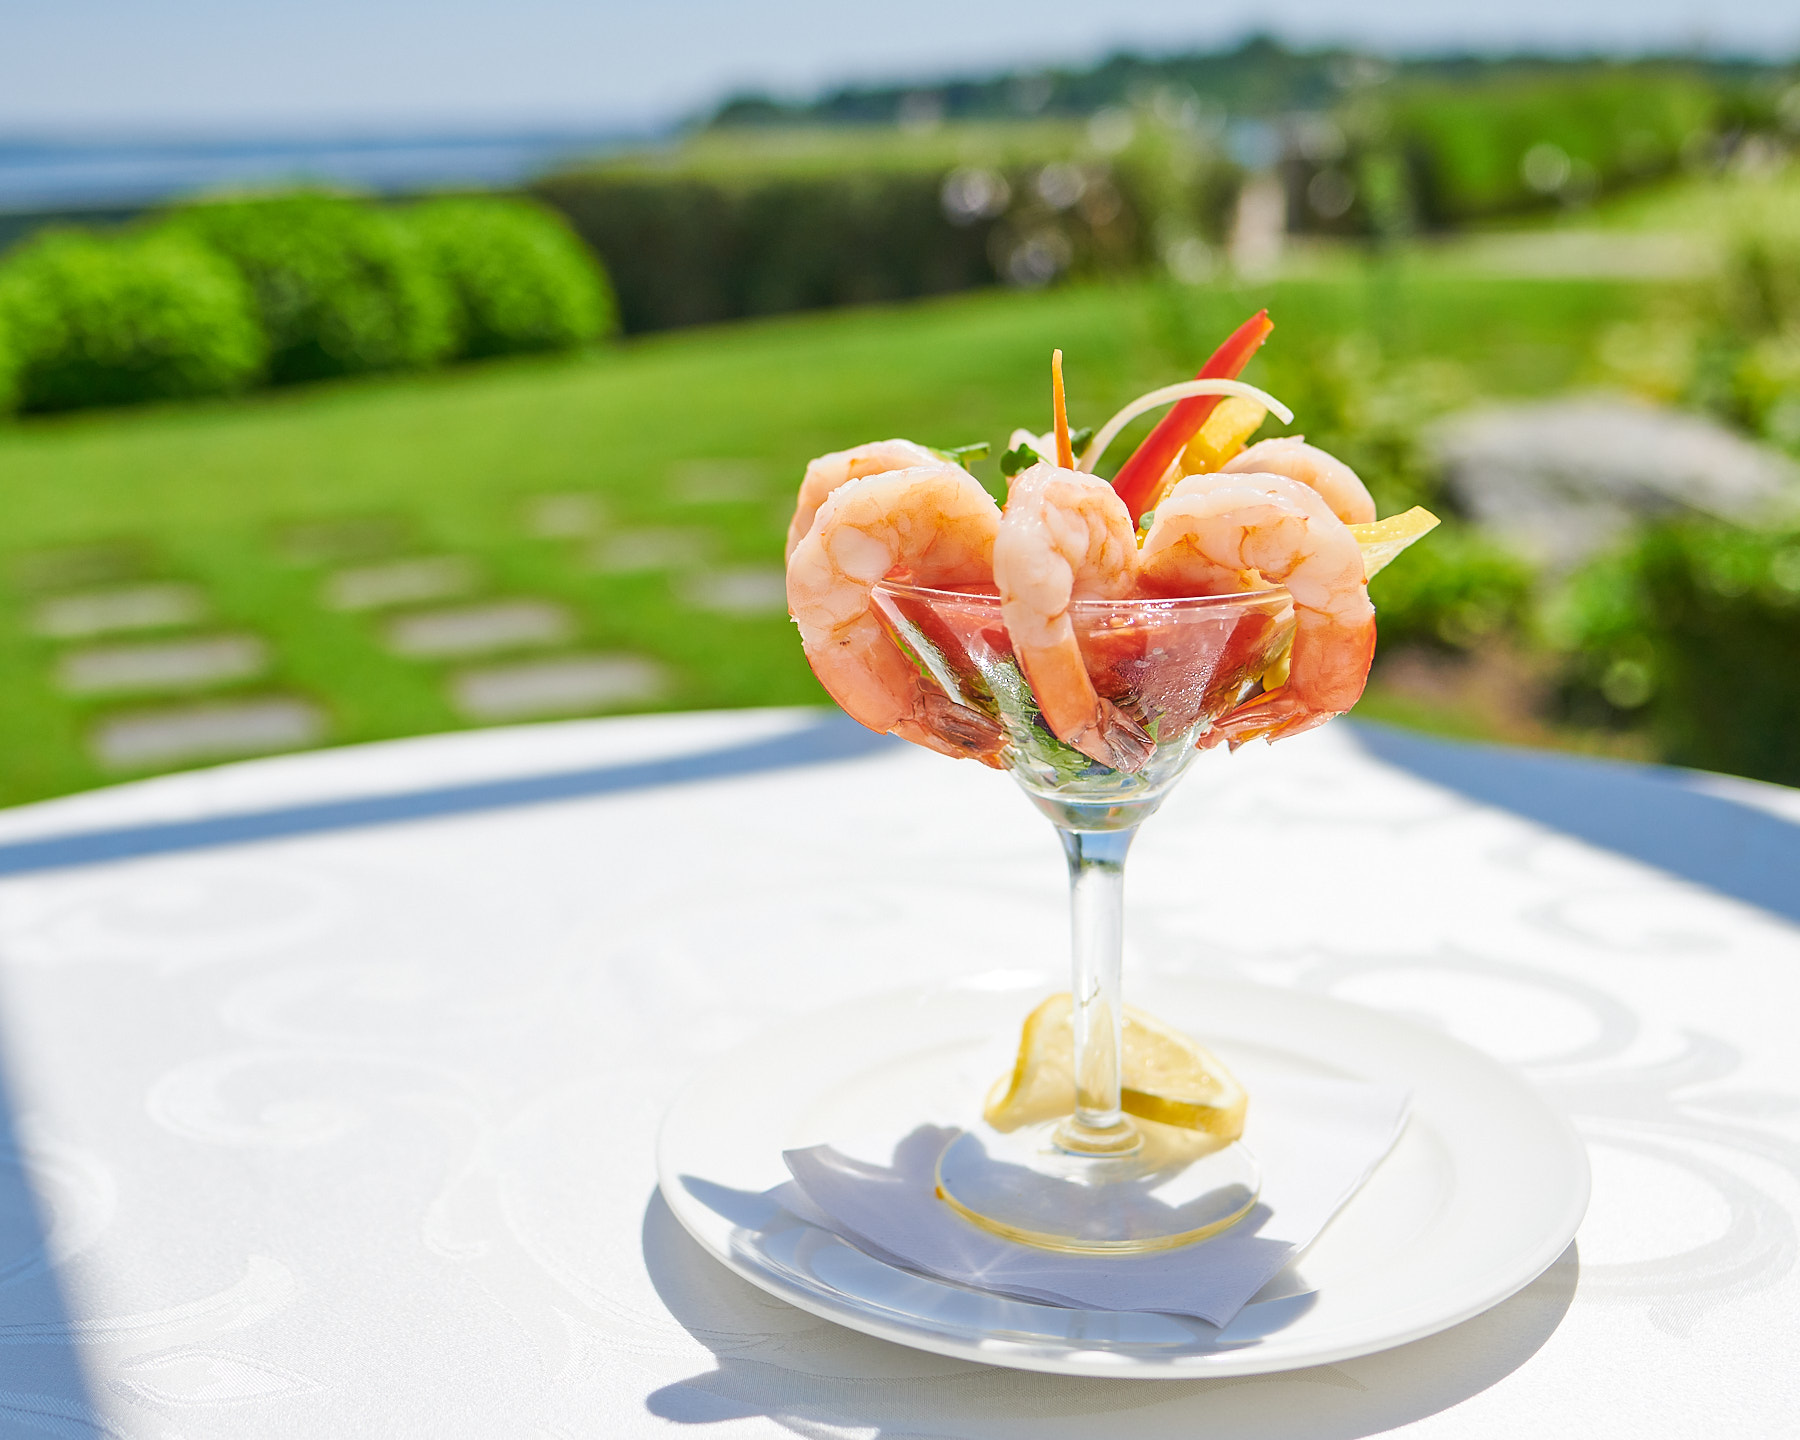 Shrimp appetizer served at the waterfront of Greentree Country Club